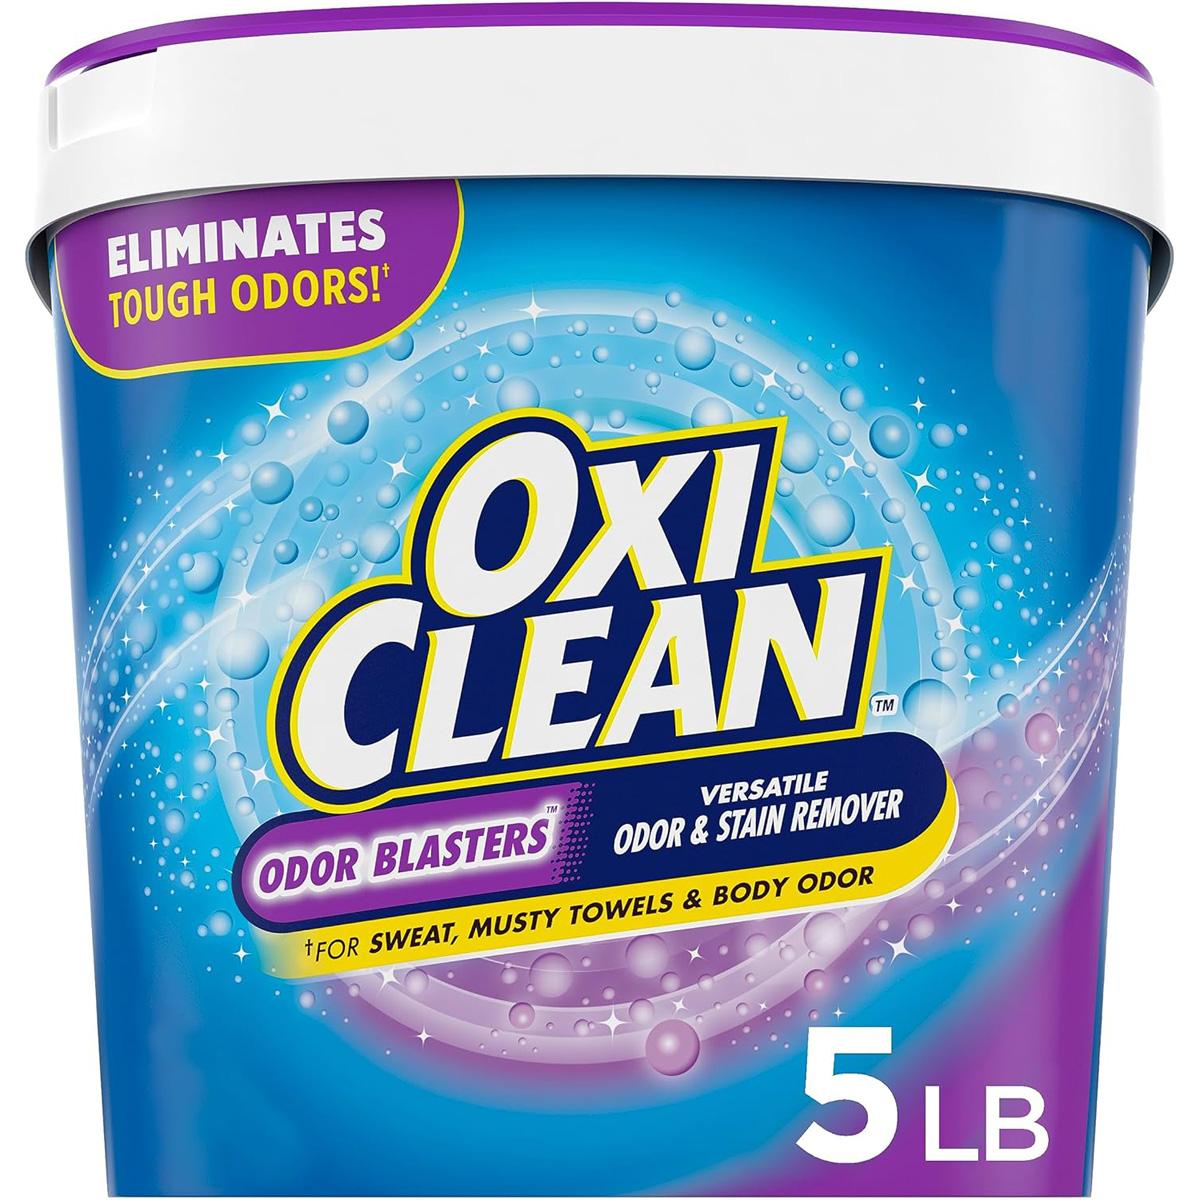 OxiClean Odor Blasters Versatile Odor and Stain Remover Powder for $7.66 Shipped